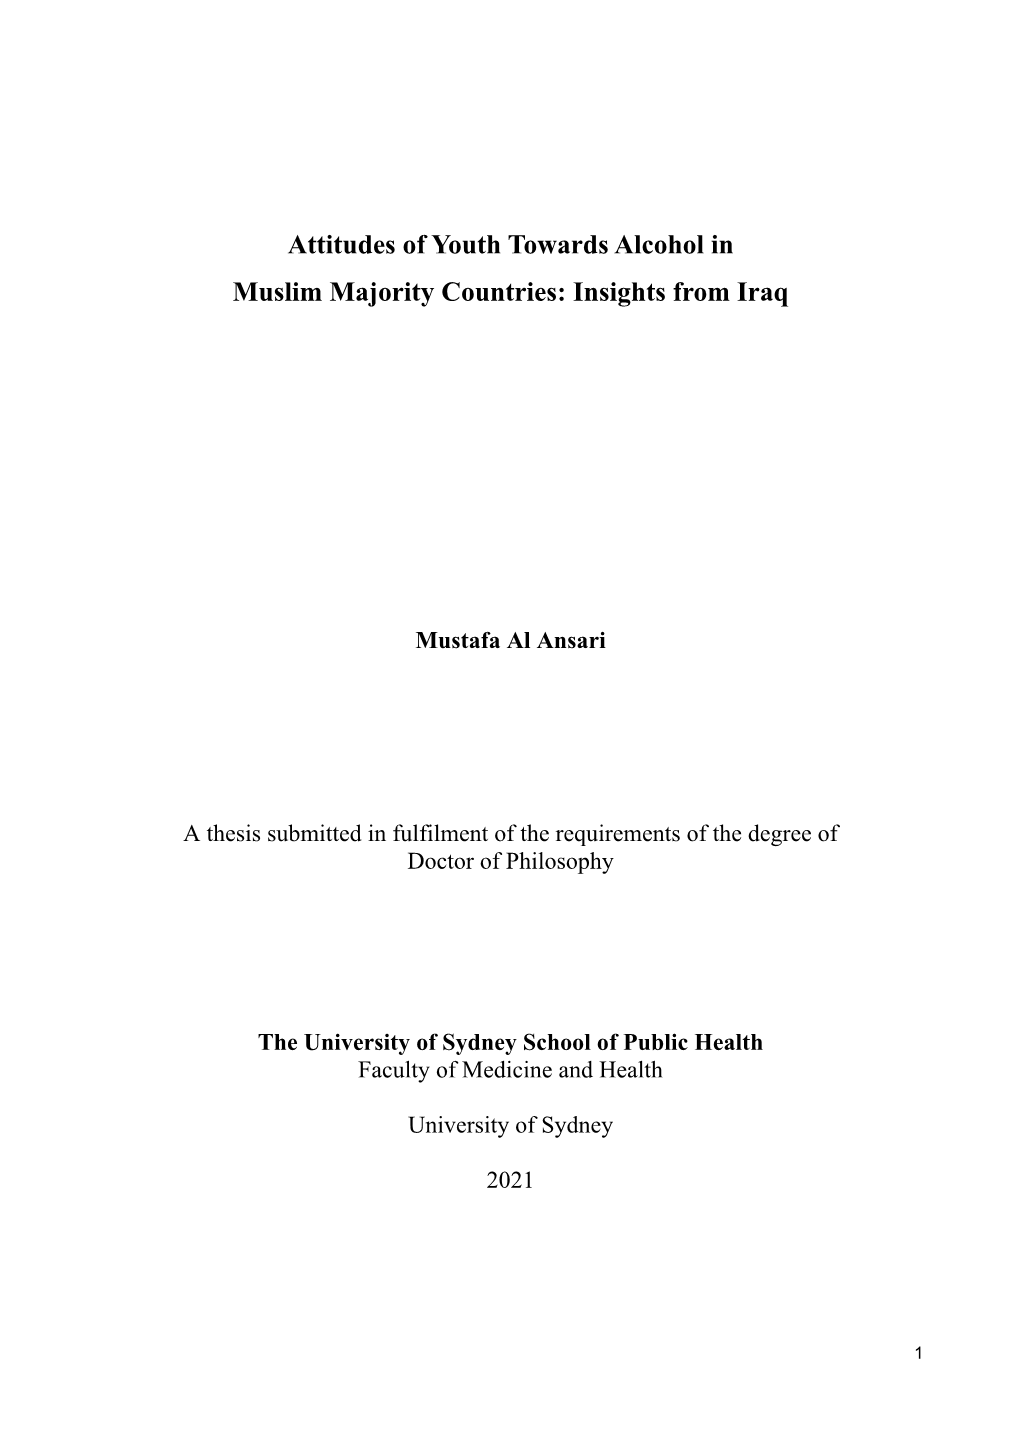 Attitudes of Youth Towards Alcohol in Muslim Majority Countries: Insights from Iraq